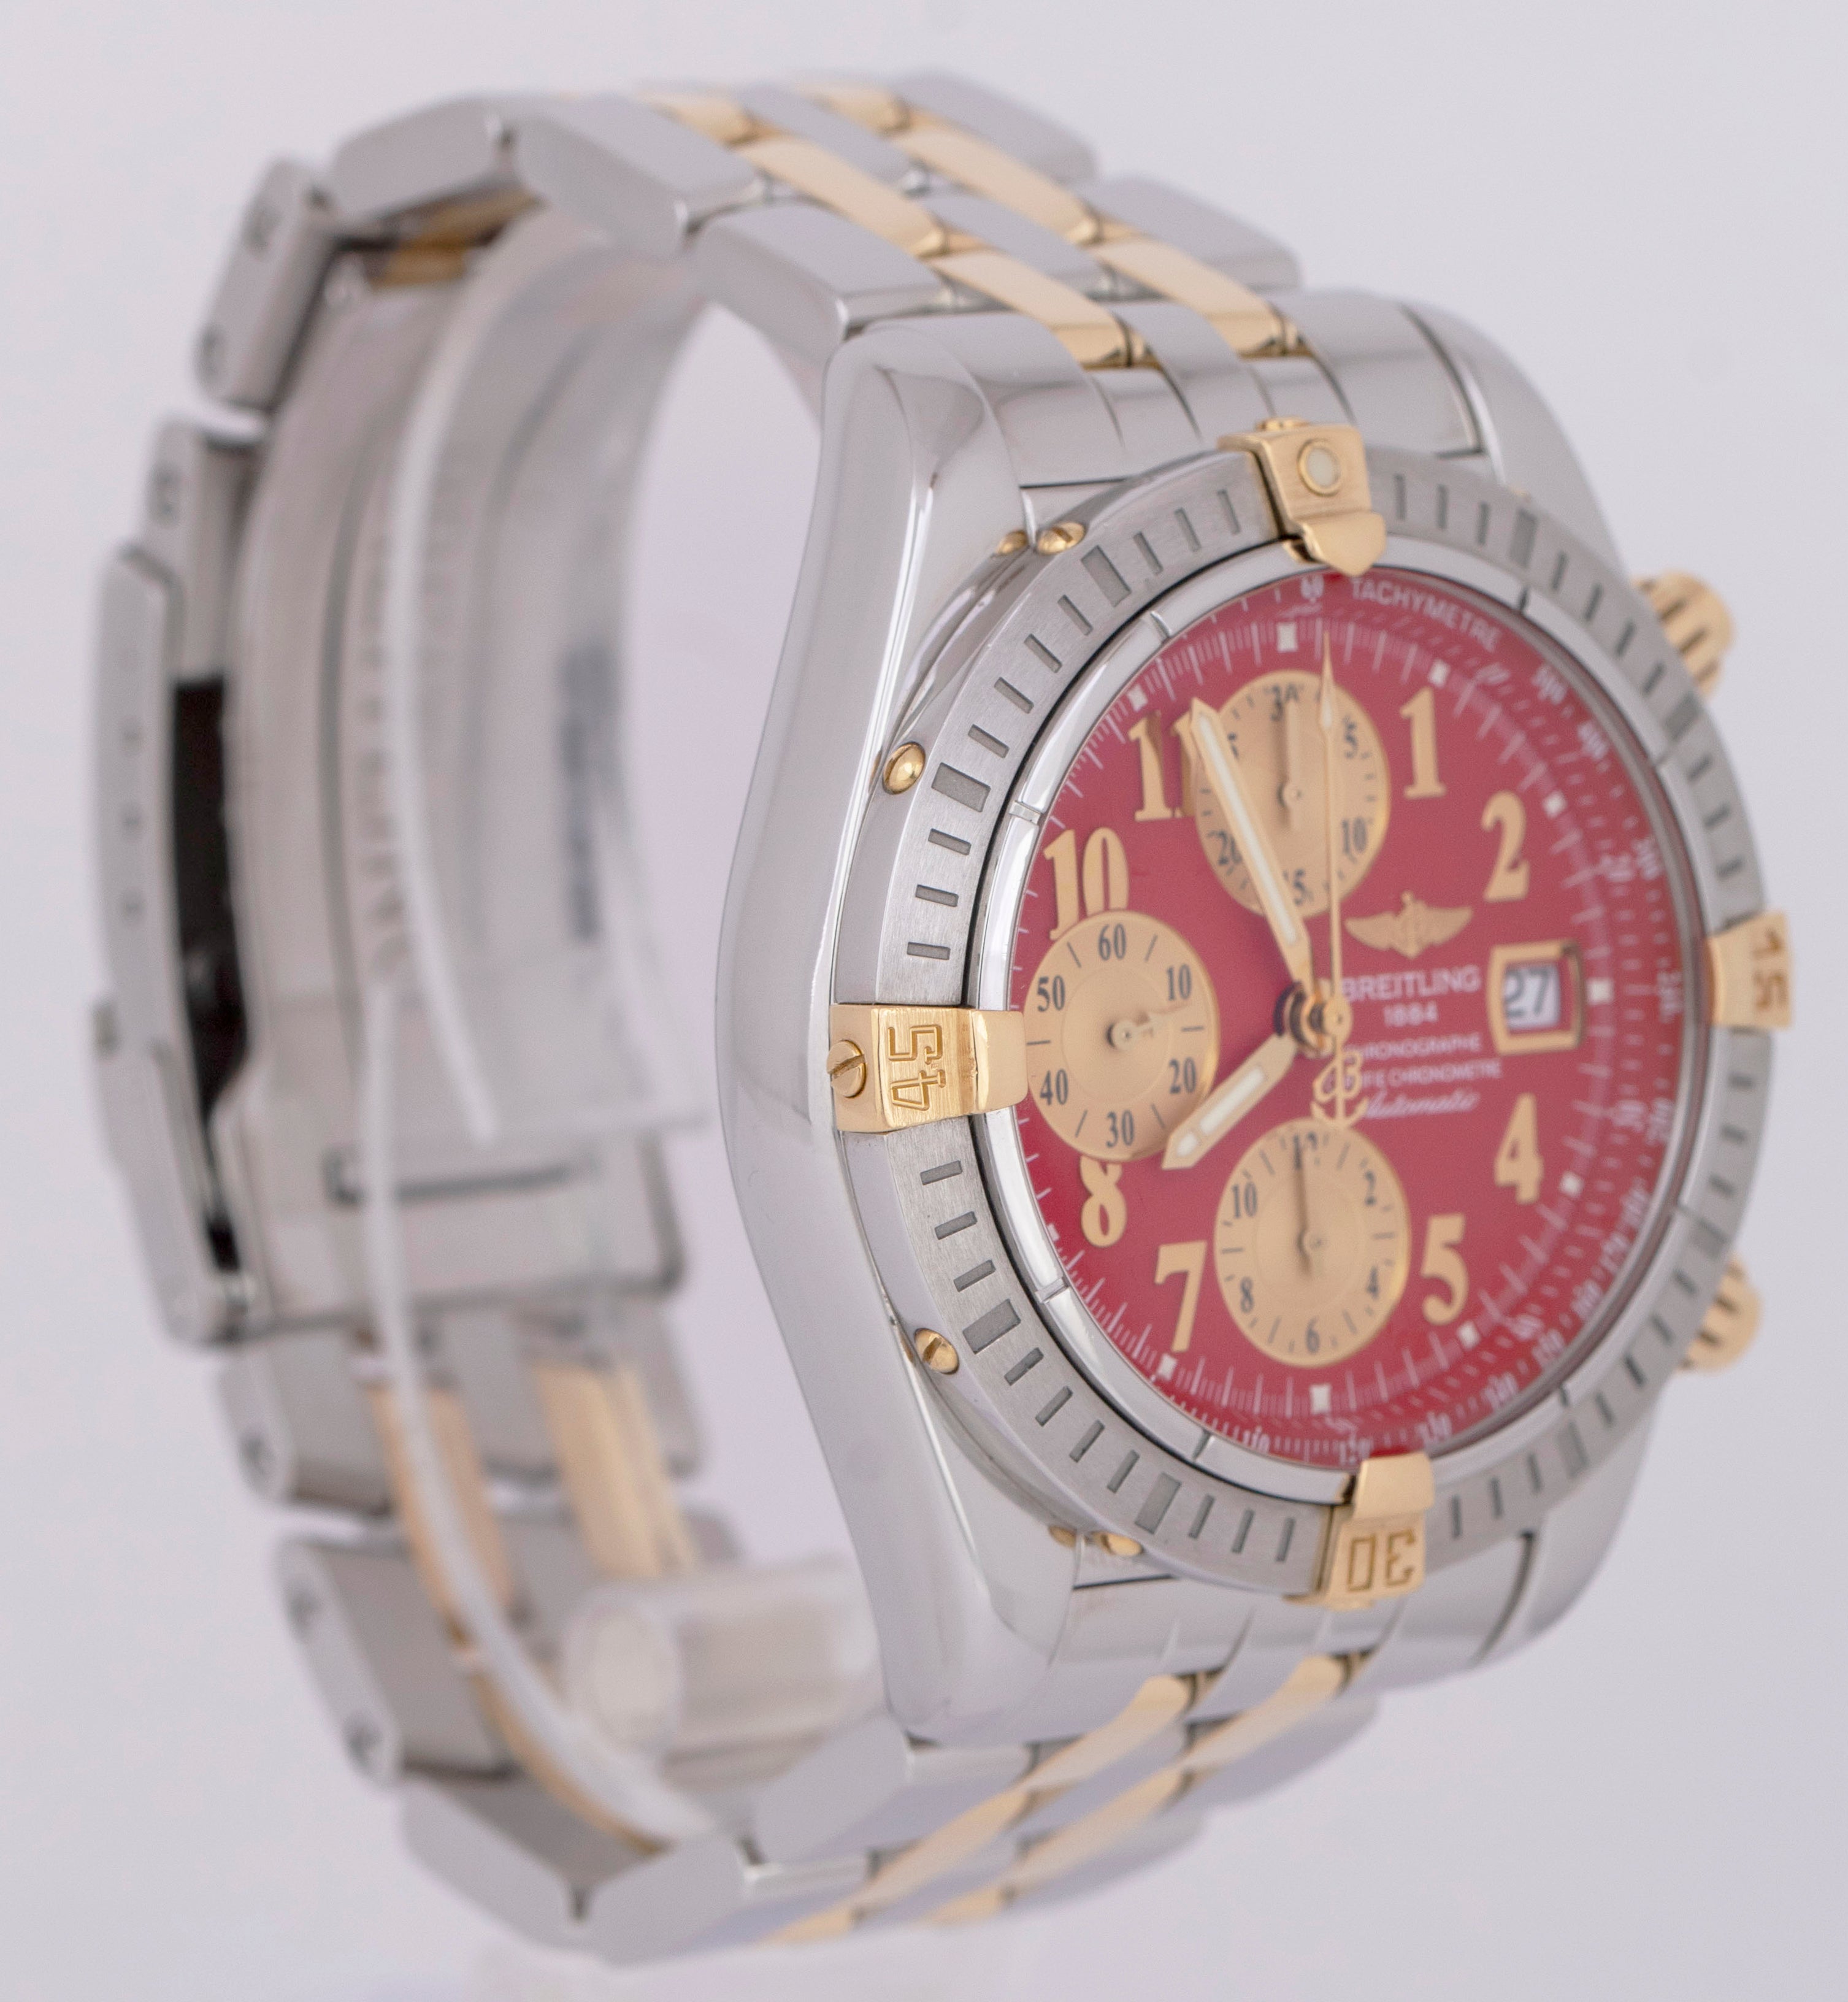 MINT Breitling Chronomat Evolution RED Two-Tone 44mm Gold Steel Watch B13356 BOX